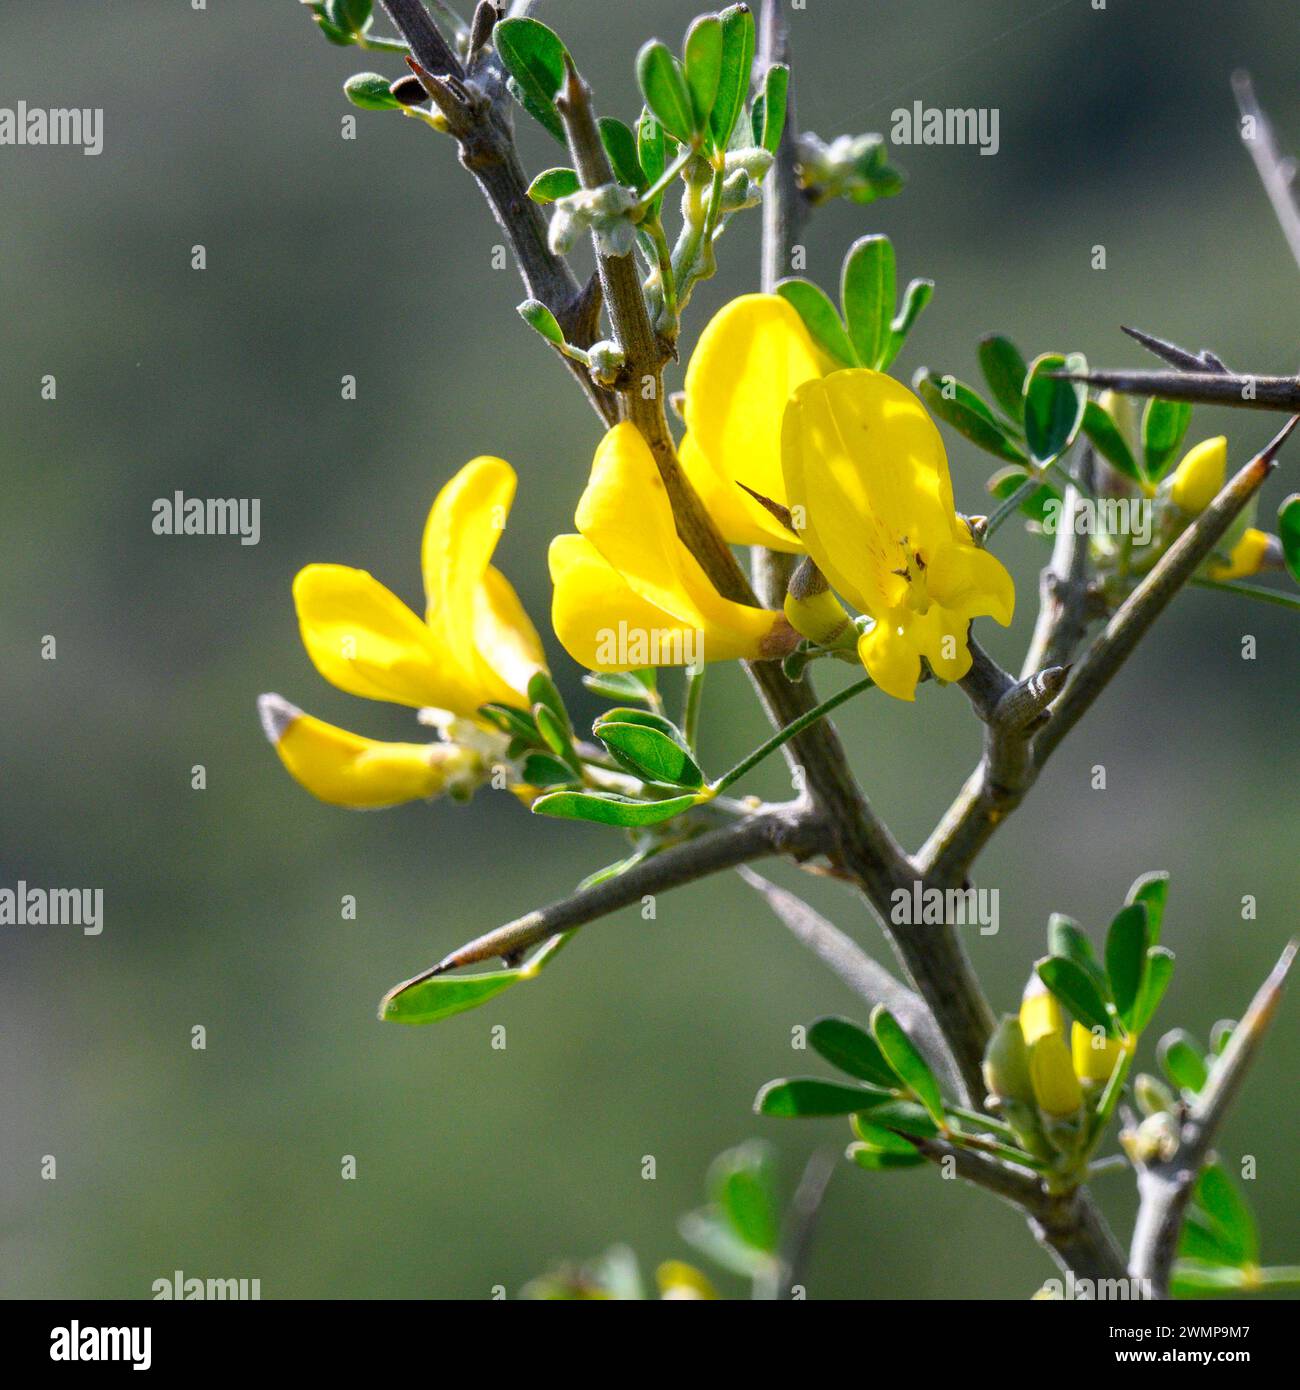 Calicotome villosa, also known as hairy thorny broom and spiny broom, is a small shrubby tree native to the eastern Mediterranean region. Photographed Stock Photo